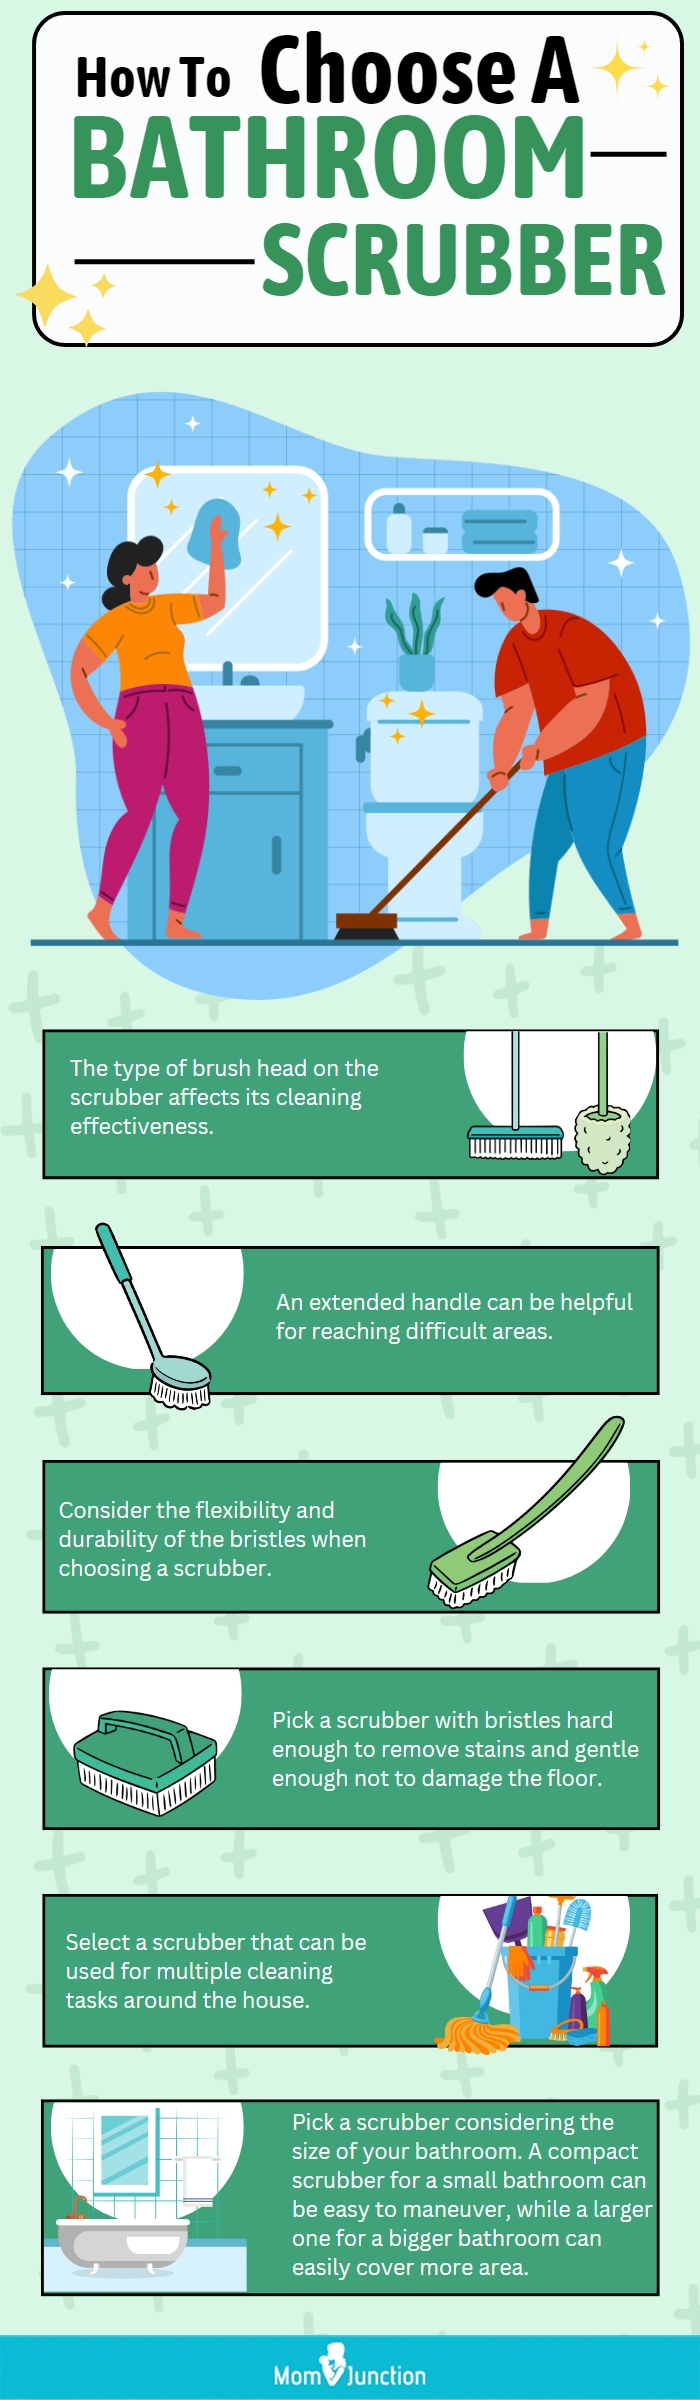 How To Choose A Bathroom Scrubber Row-32 content team (infographic)